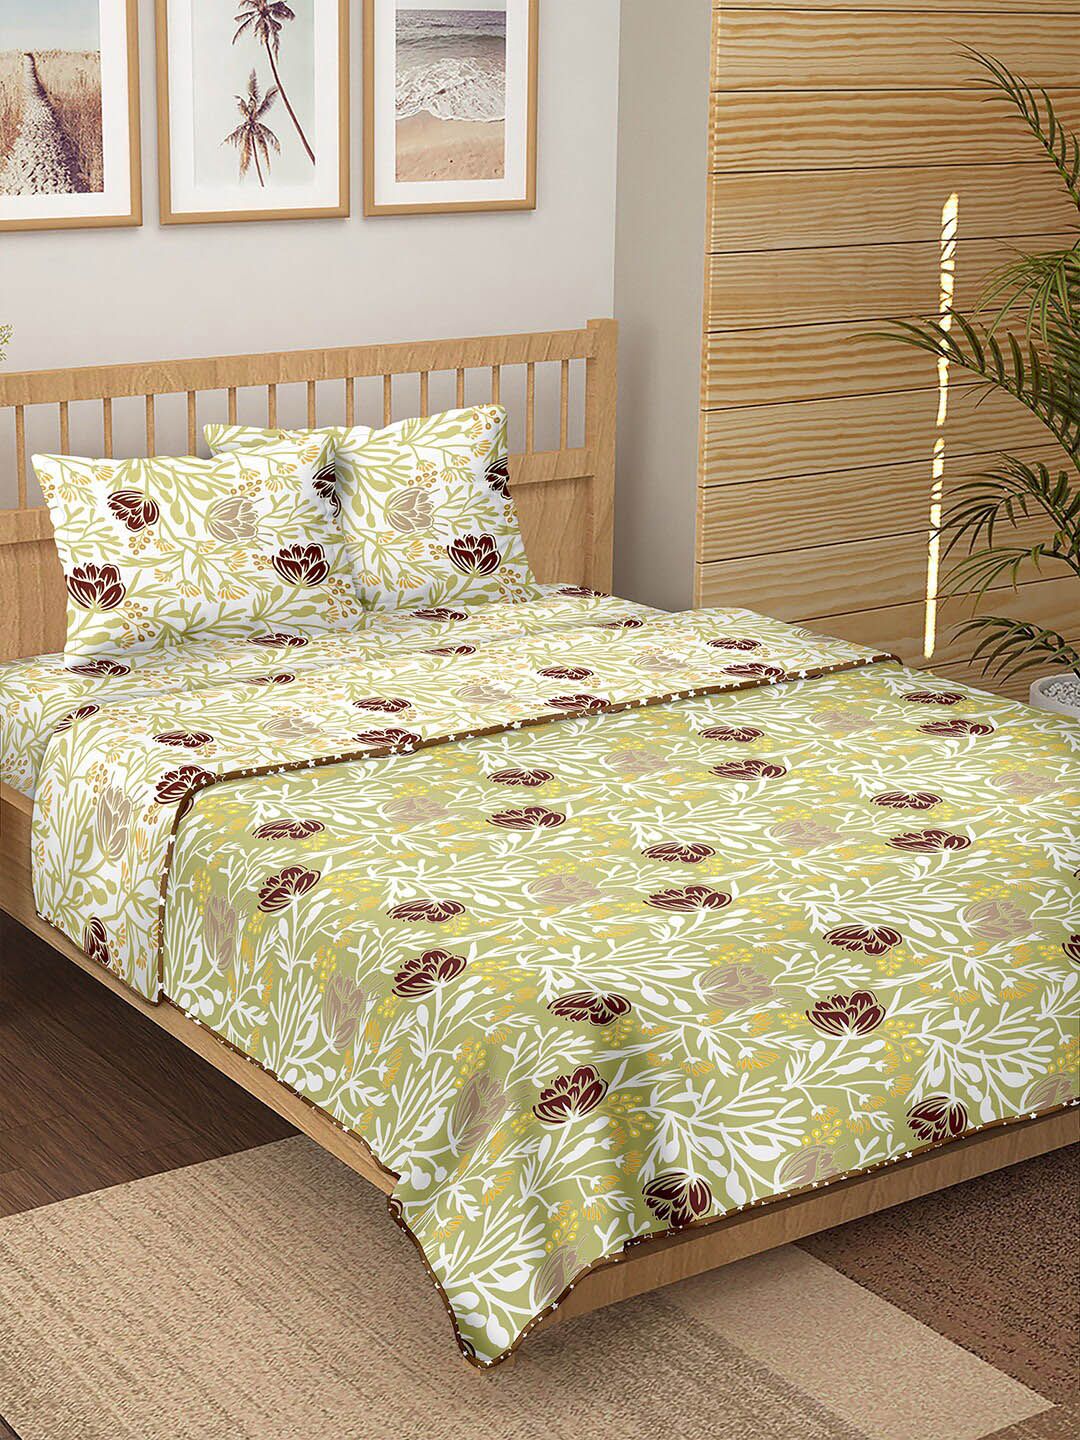 BELLA CASA Green & White Floral Printed Cotton 150 TC Double King Bedding Set Price in India